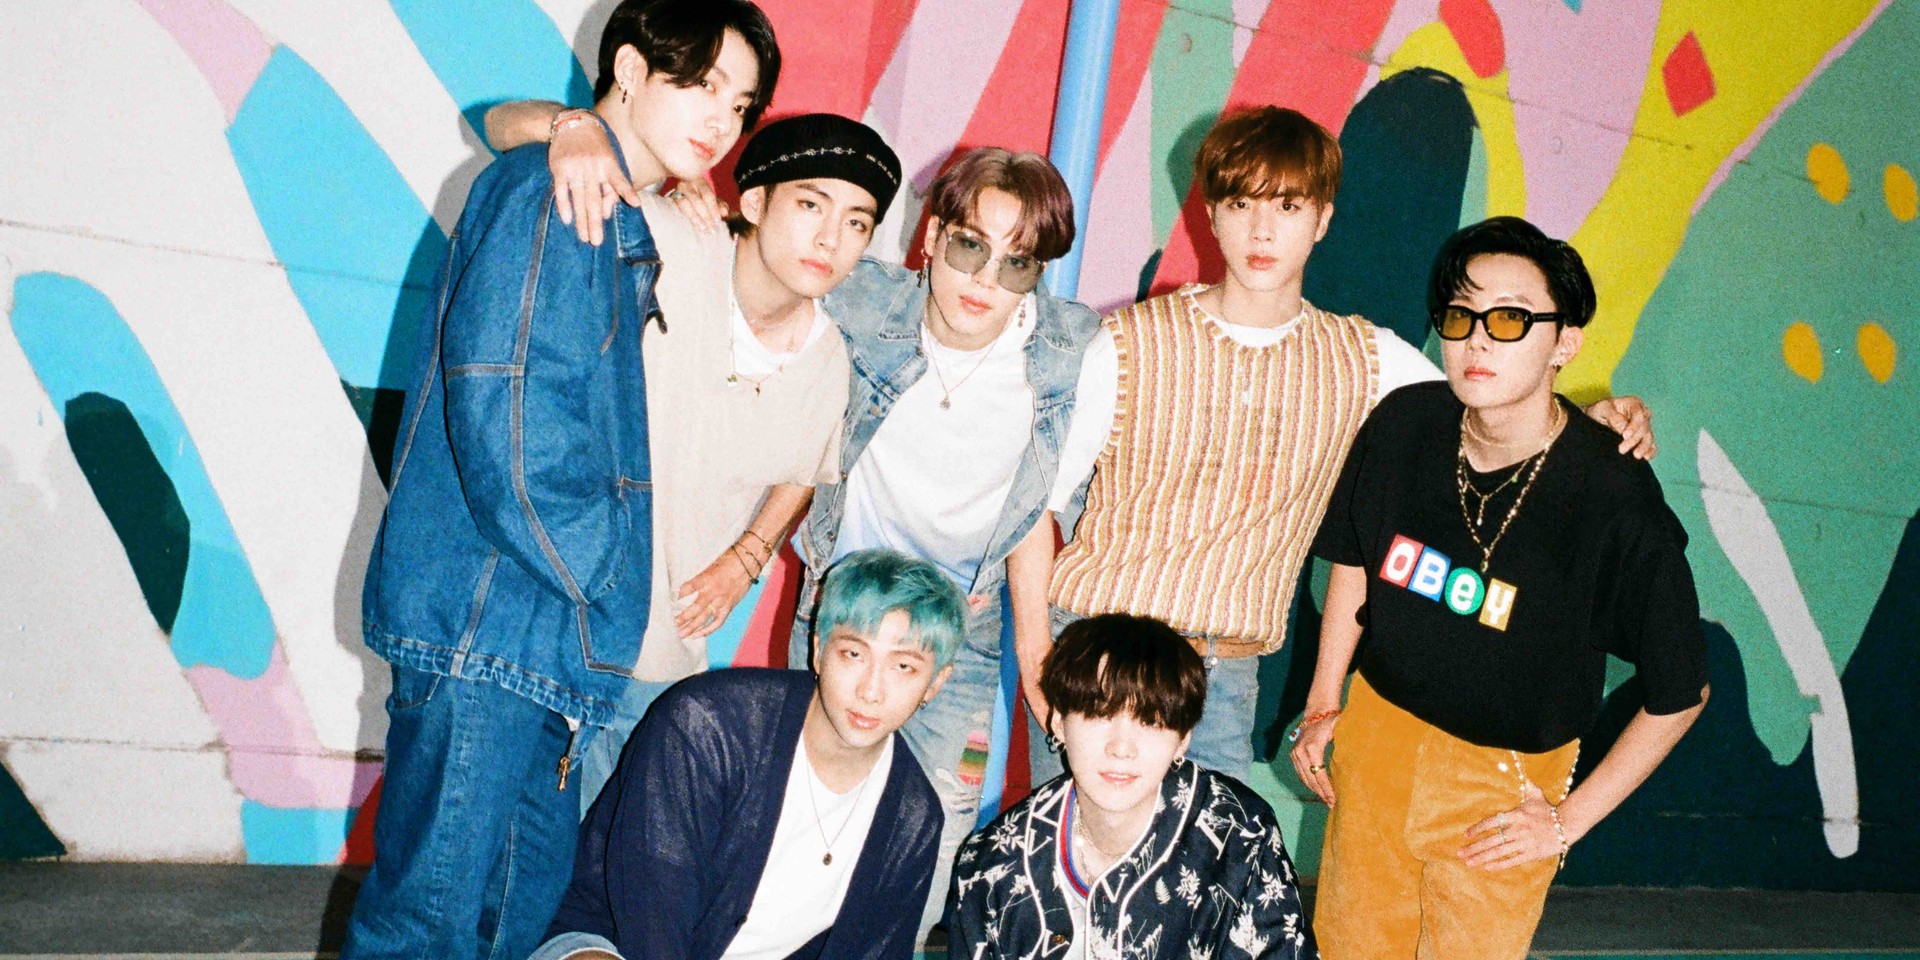 BTS' music video for 'Dynamite' joins 'DNA' and 'Boy with Luv' as it